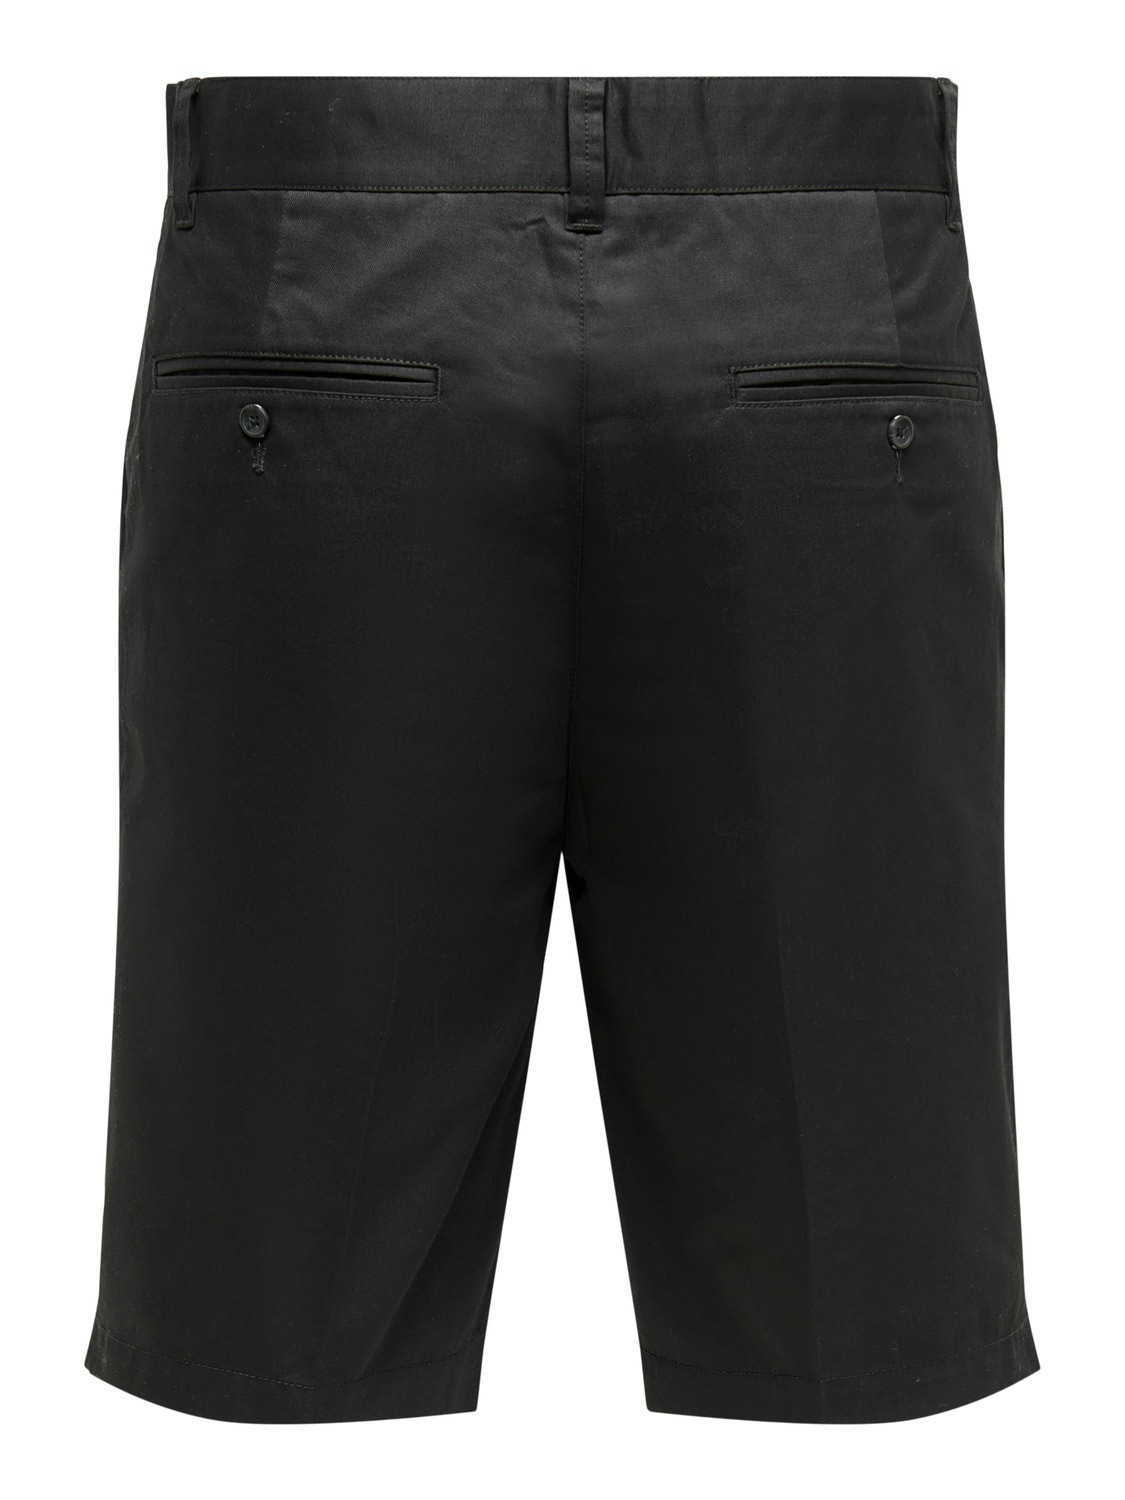 ONLY & SONS Classic chino shorts -Black - 22022326